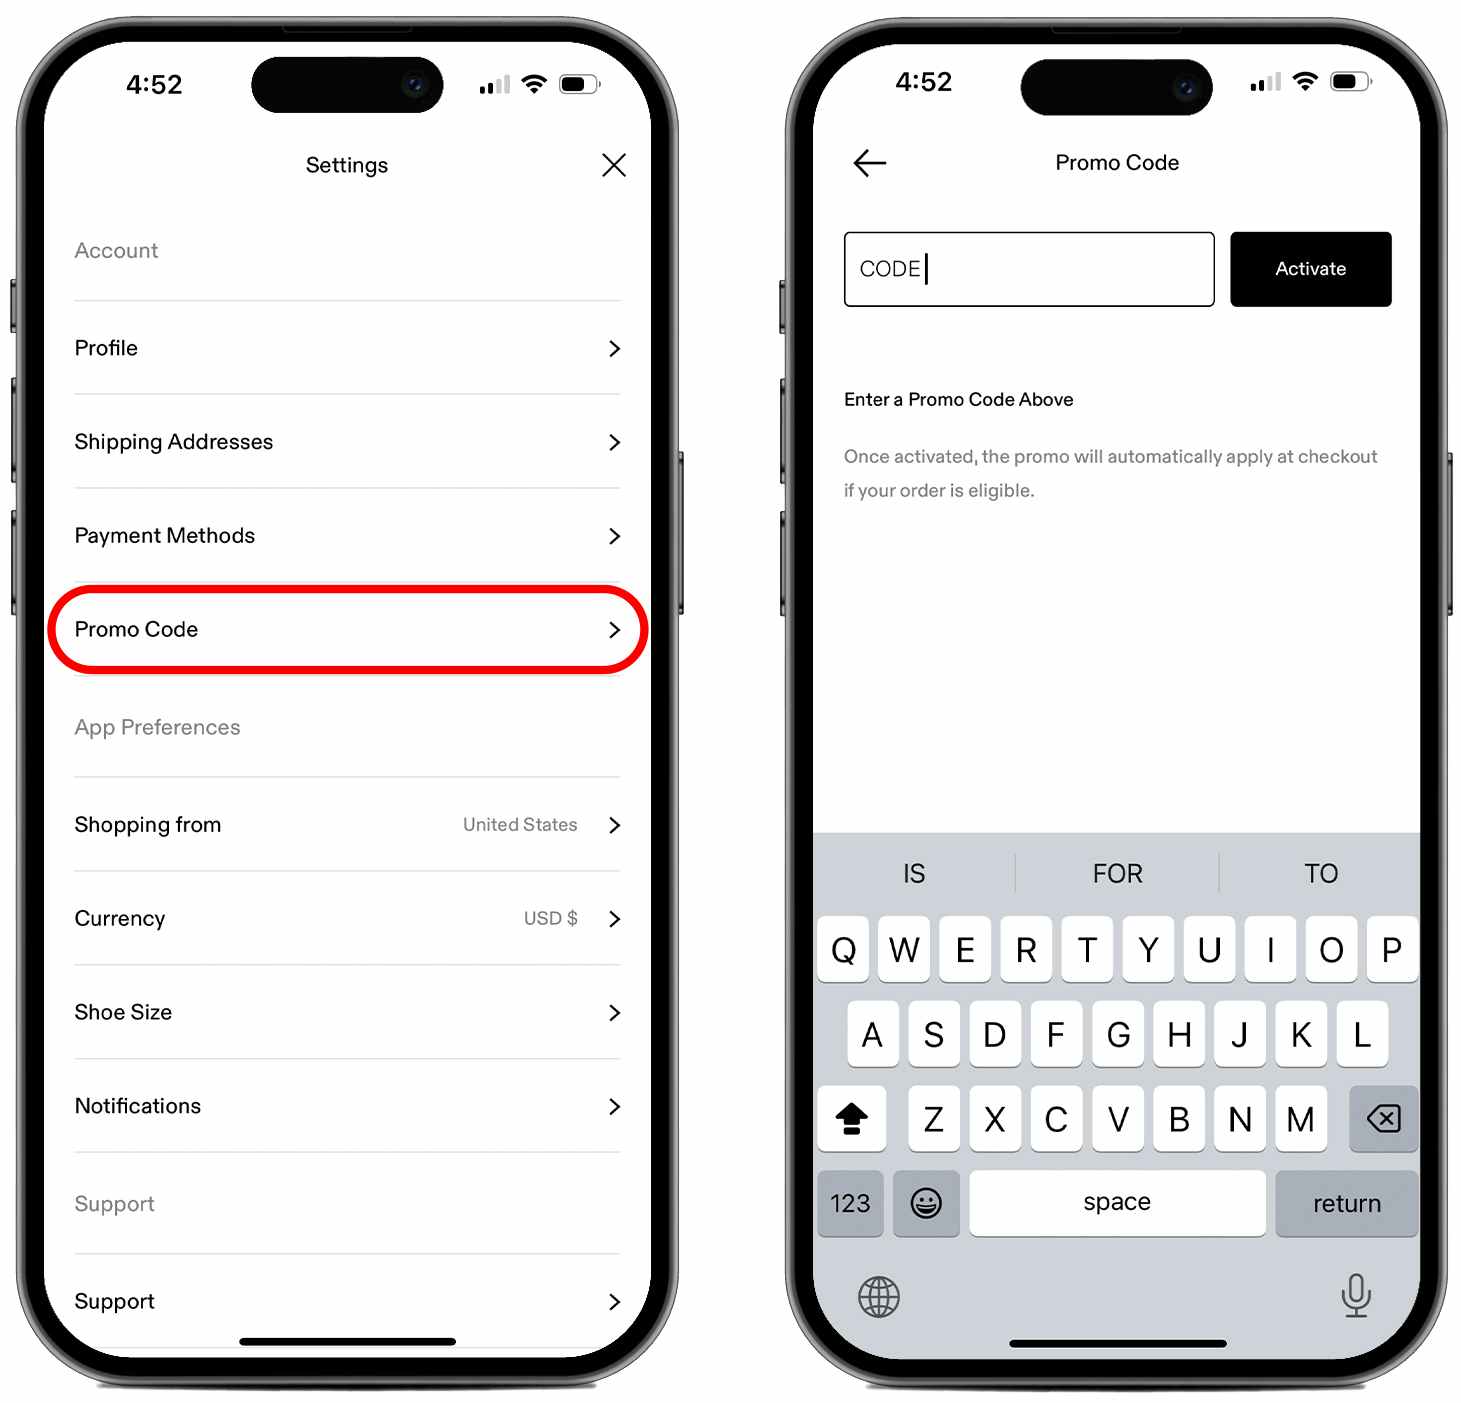 Two phones, one showing the Settings menu in the GOAT app with the Promo Code button circled in red, and the other showing the page that button takes you to